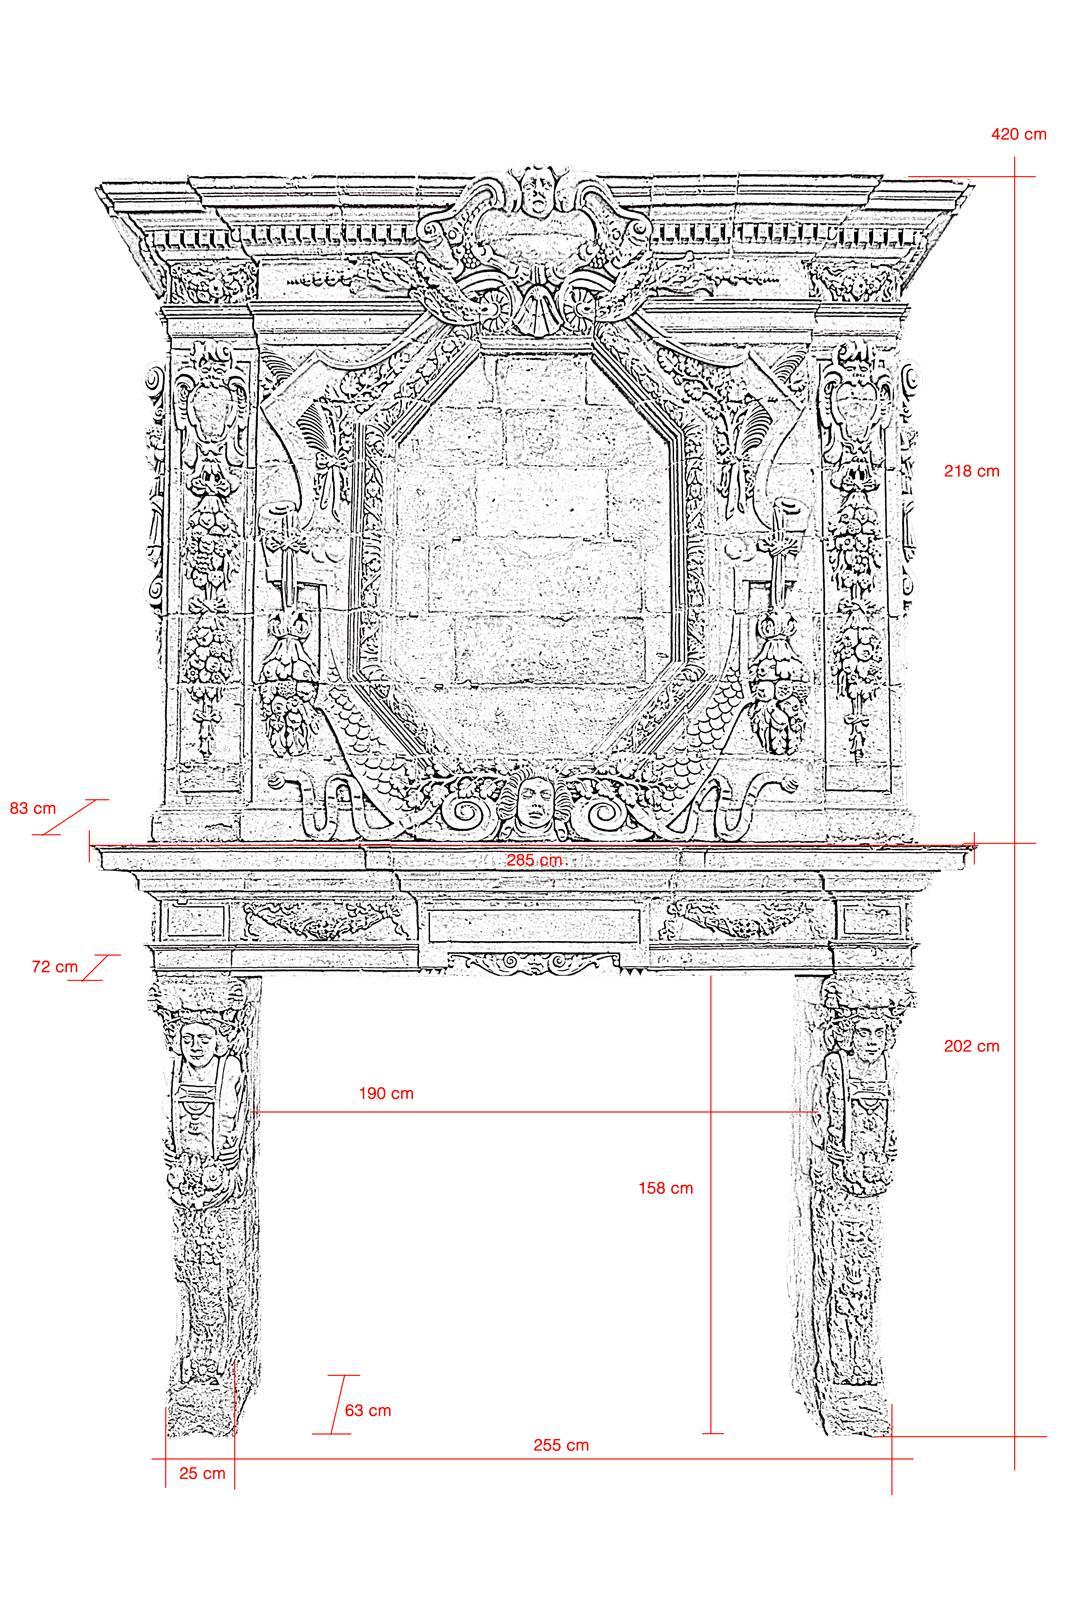 Exceptional limestone fireplace carved during the reign of Louis XIV and dated "1652". This pure Louis XIII fireplace is decorated with an octagonal central medallion surrounded by a torus of leaves and ribbons, around which are carved cut